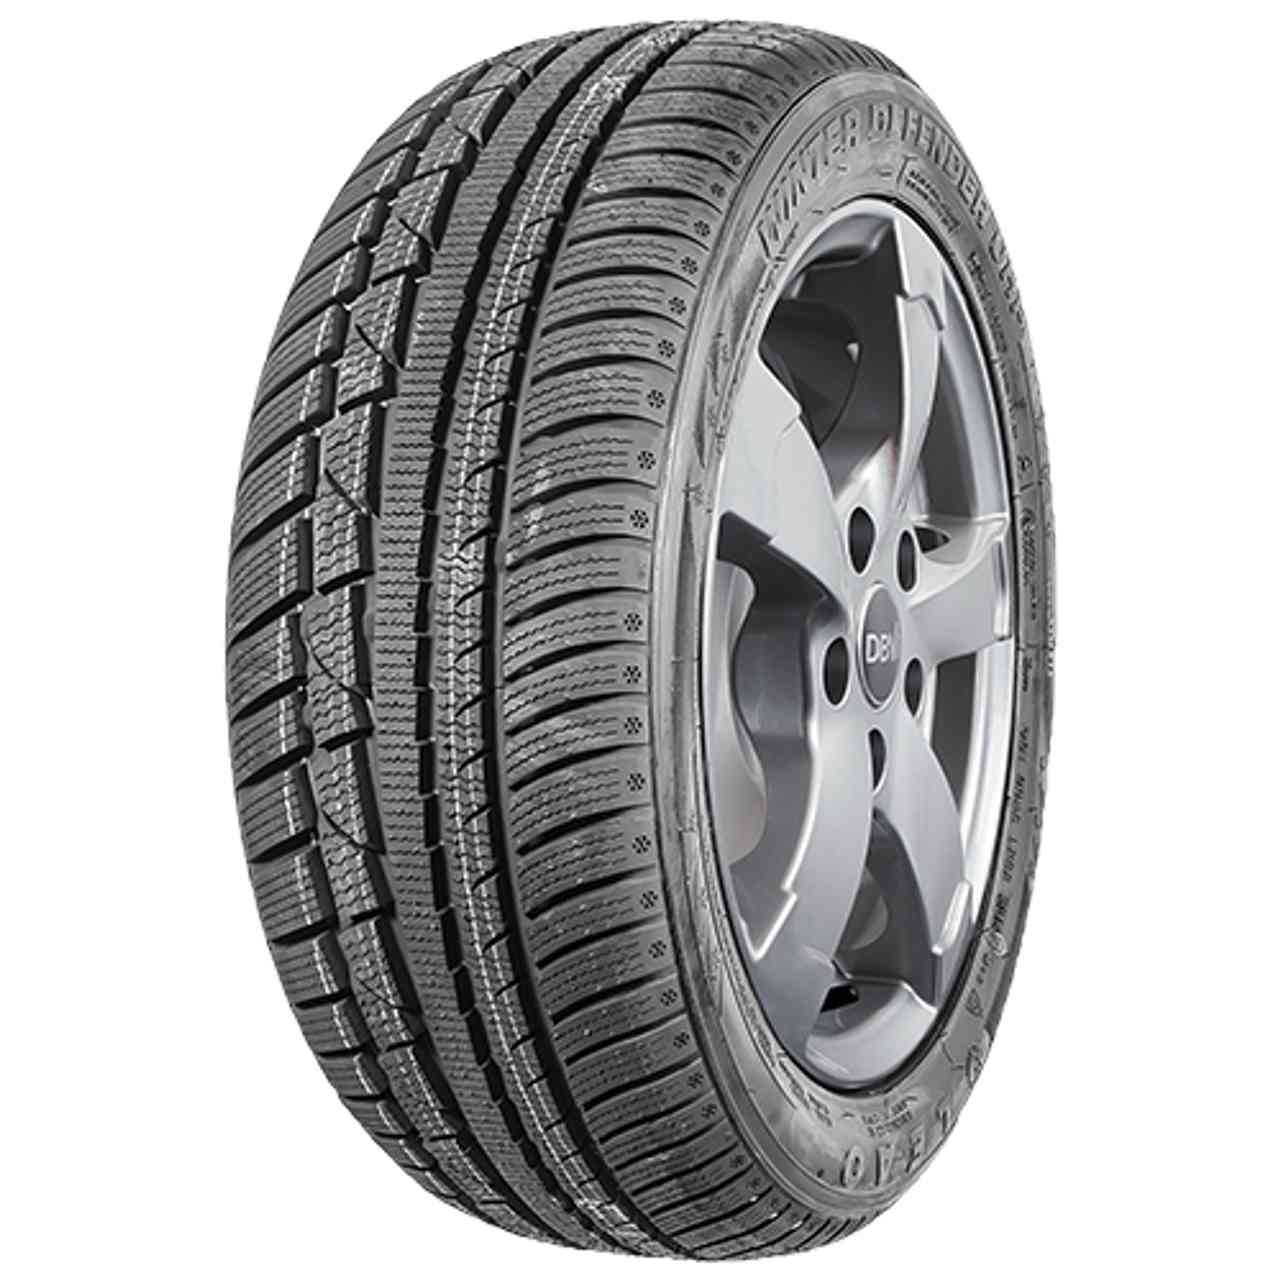 LEAO WINTER DEFENDER UHP 215/50R17 95V BSW XL